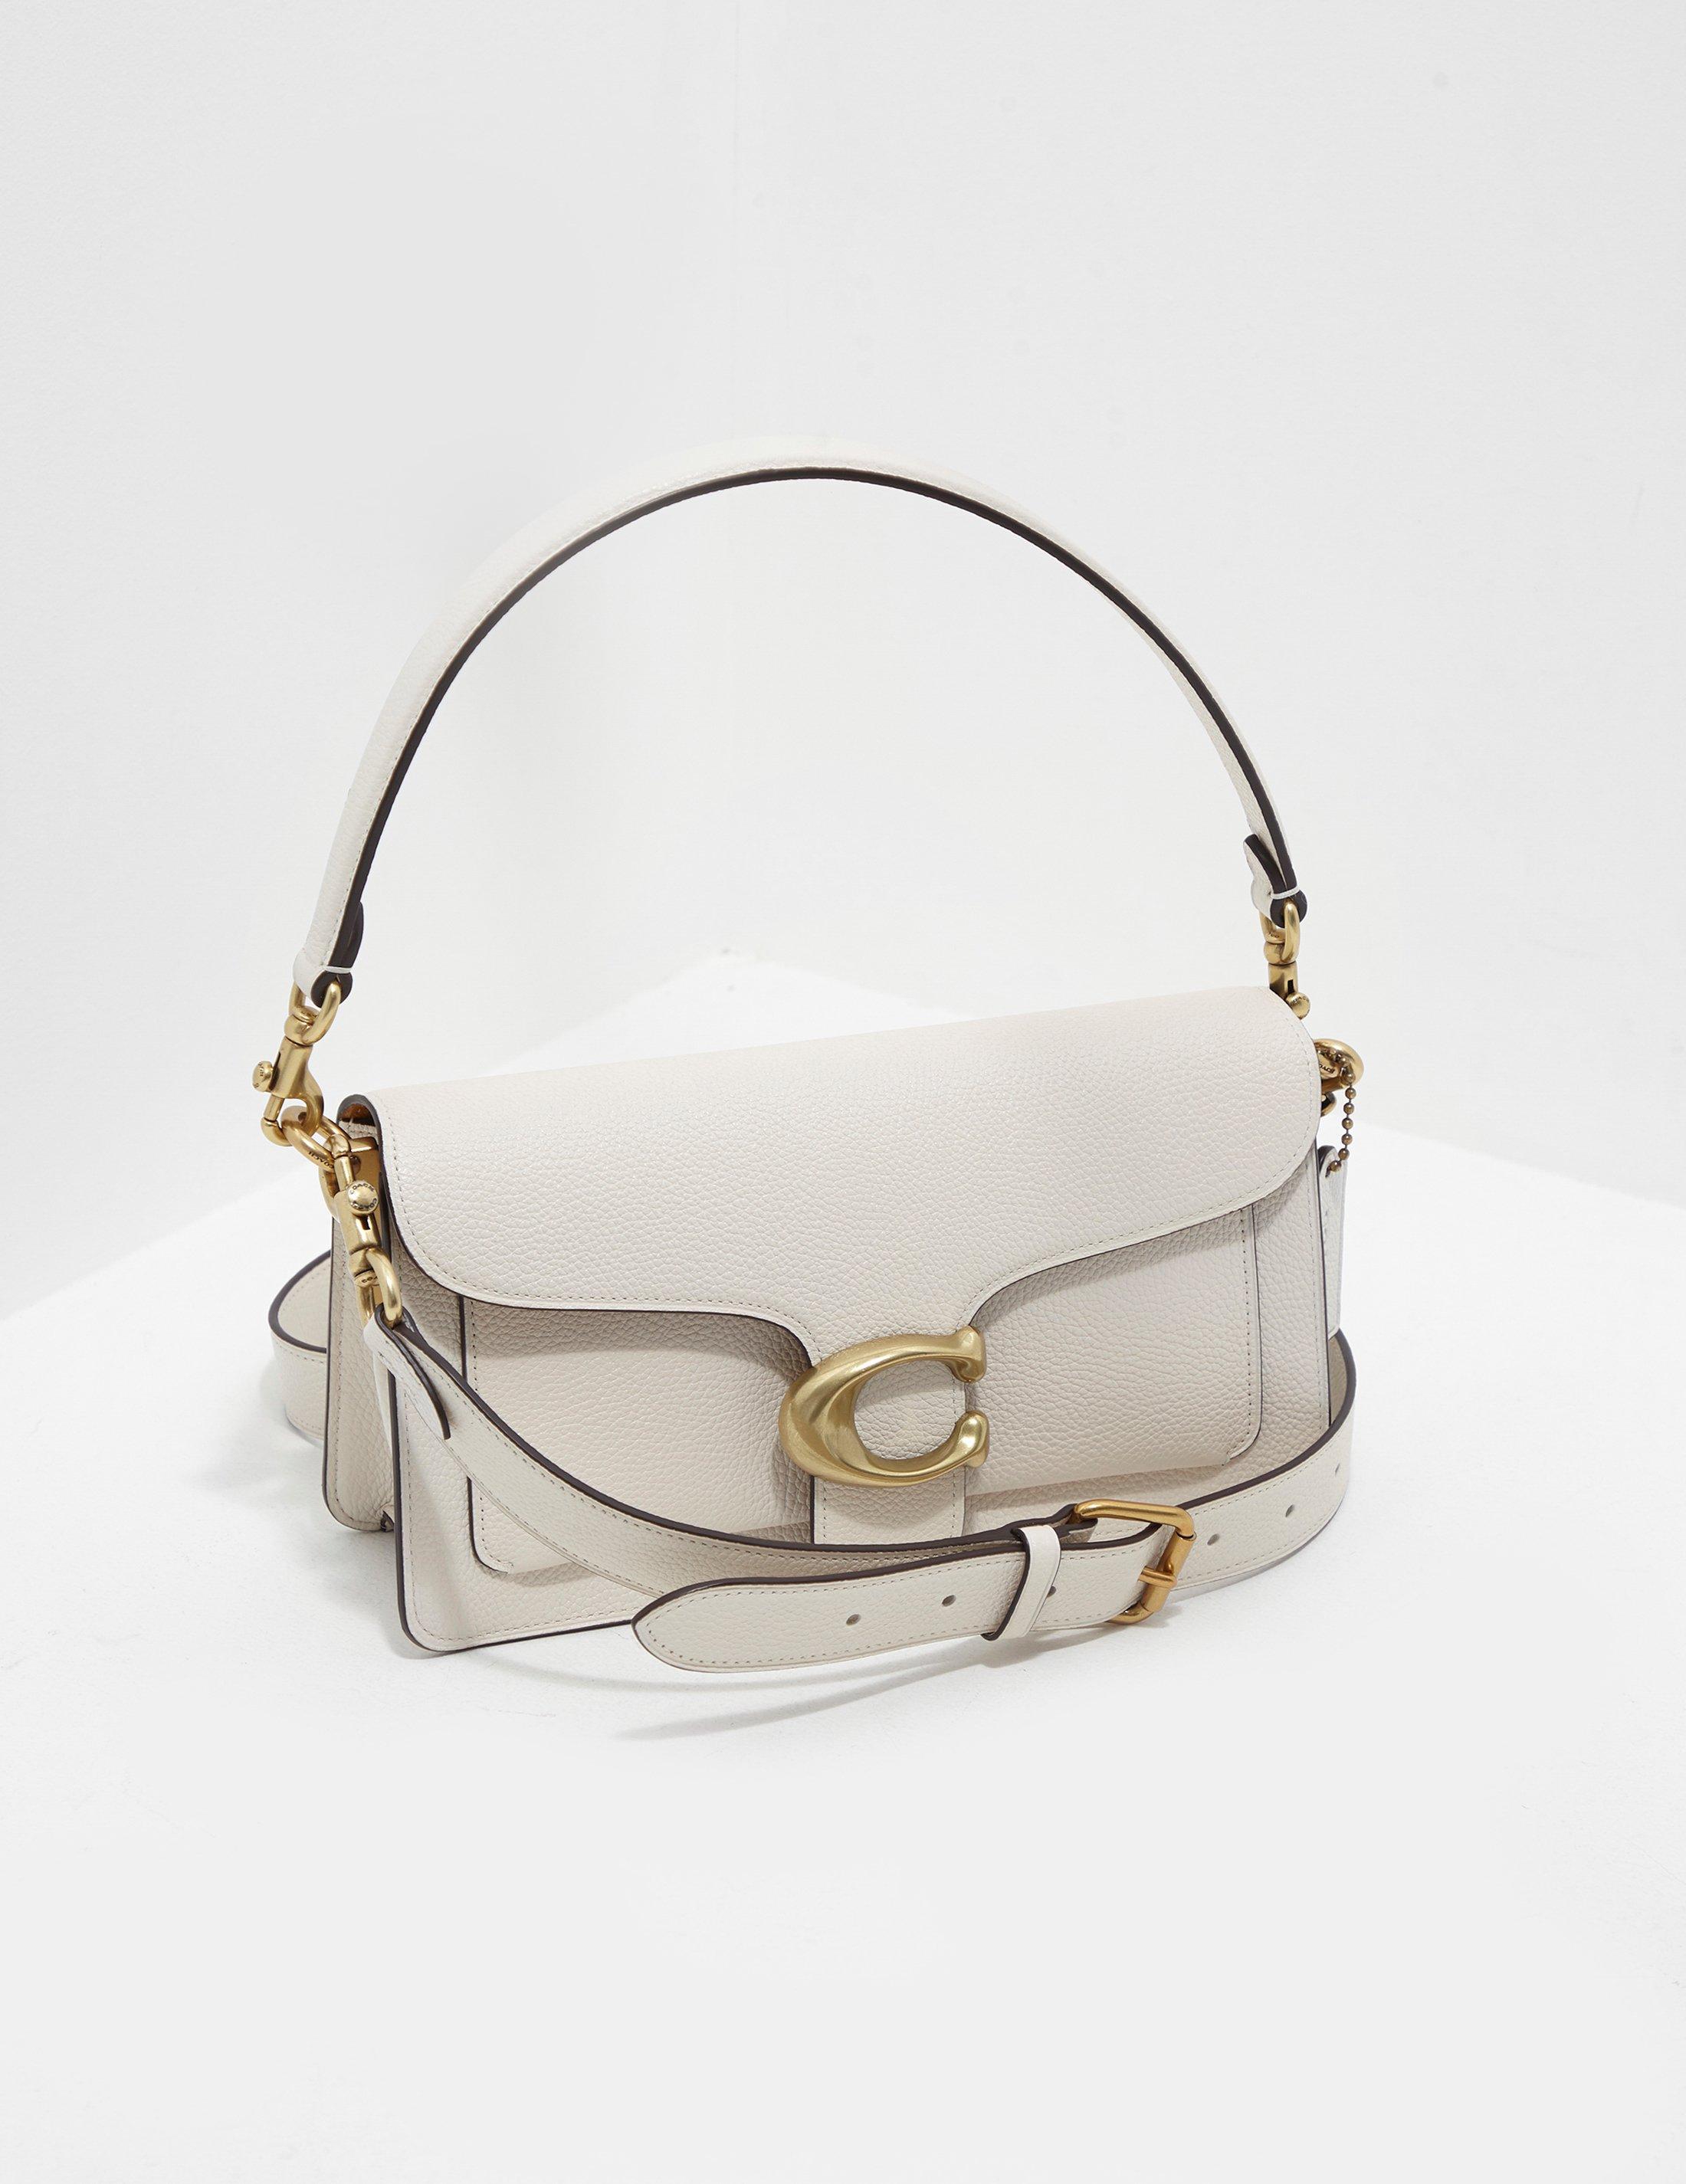 COACH Tabby 26 Shoulder Bag White in White - Lyst